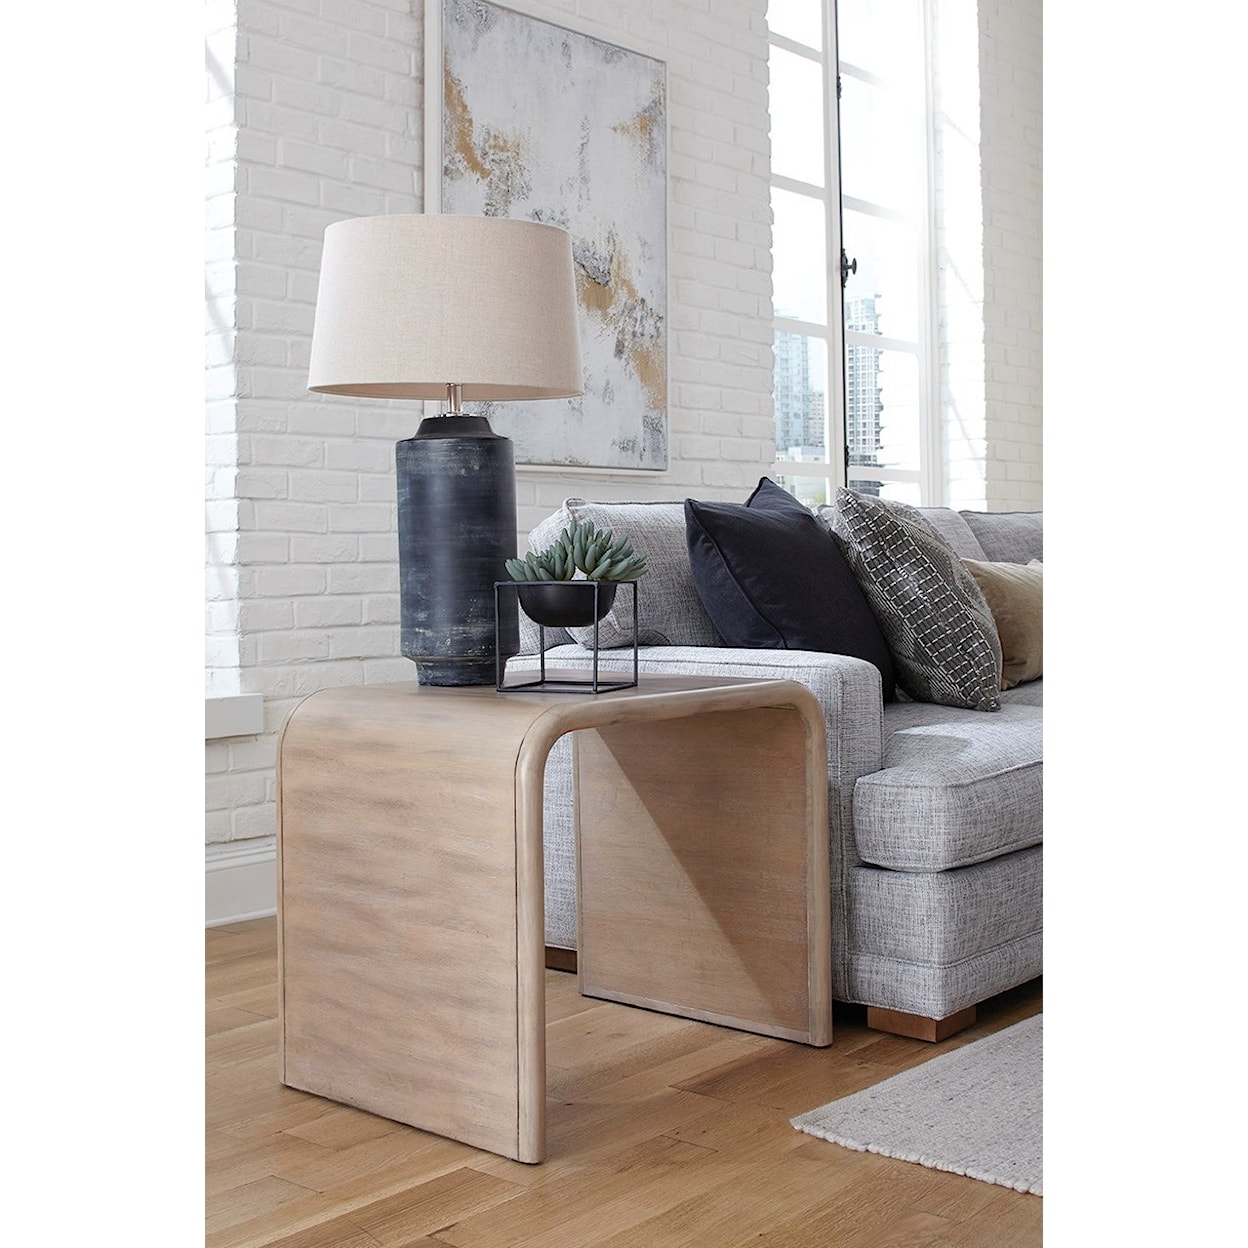 Rowe Canal End Table